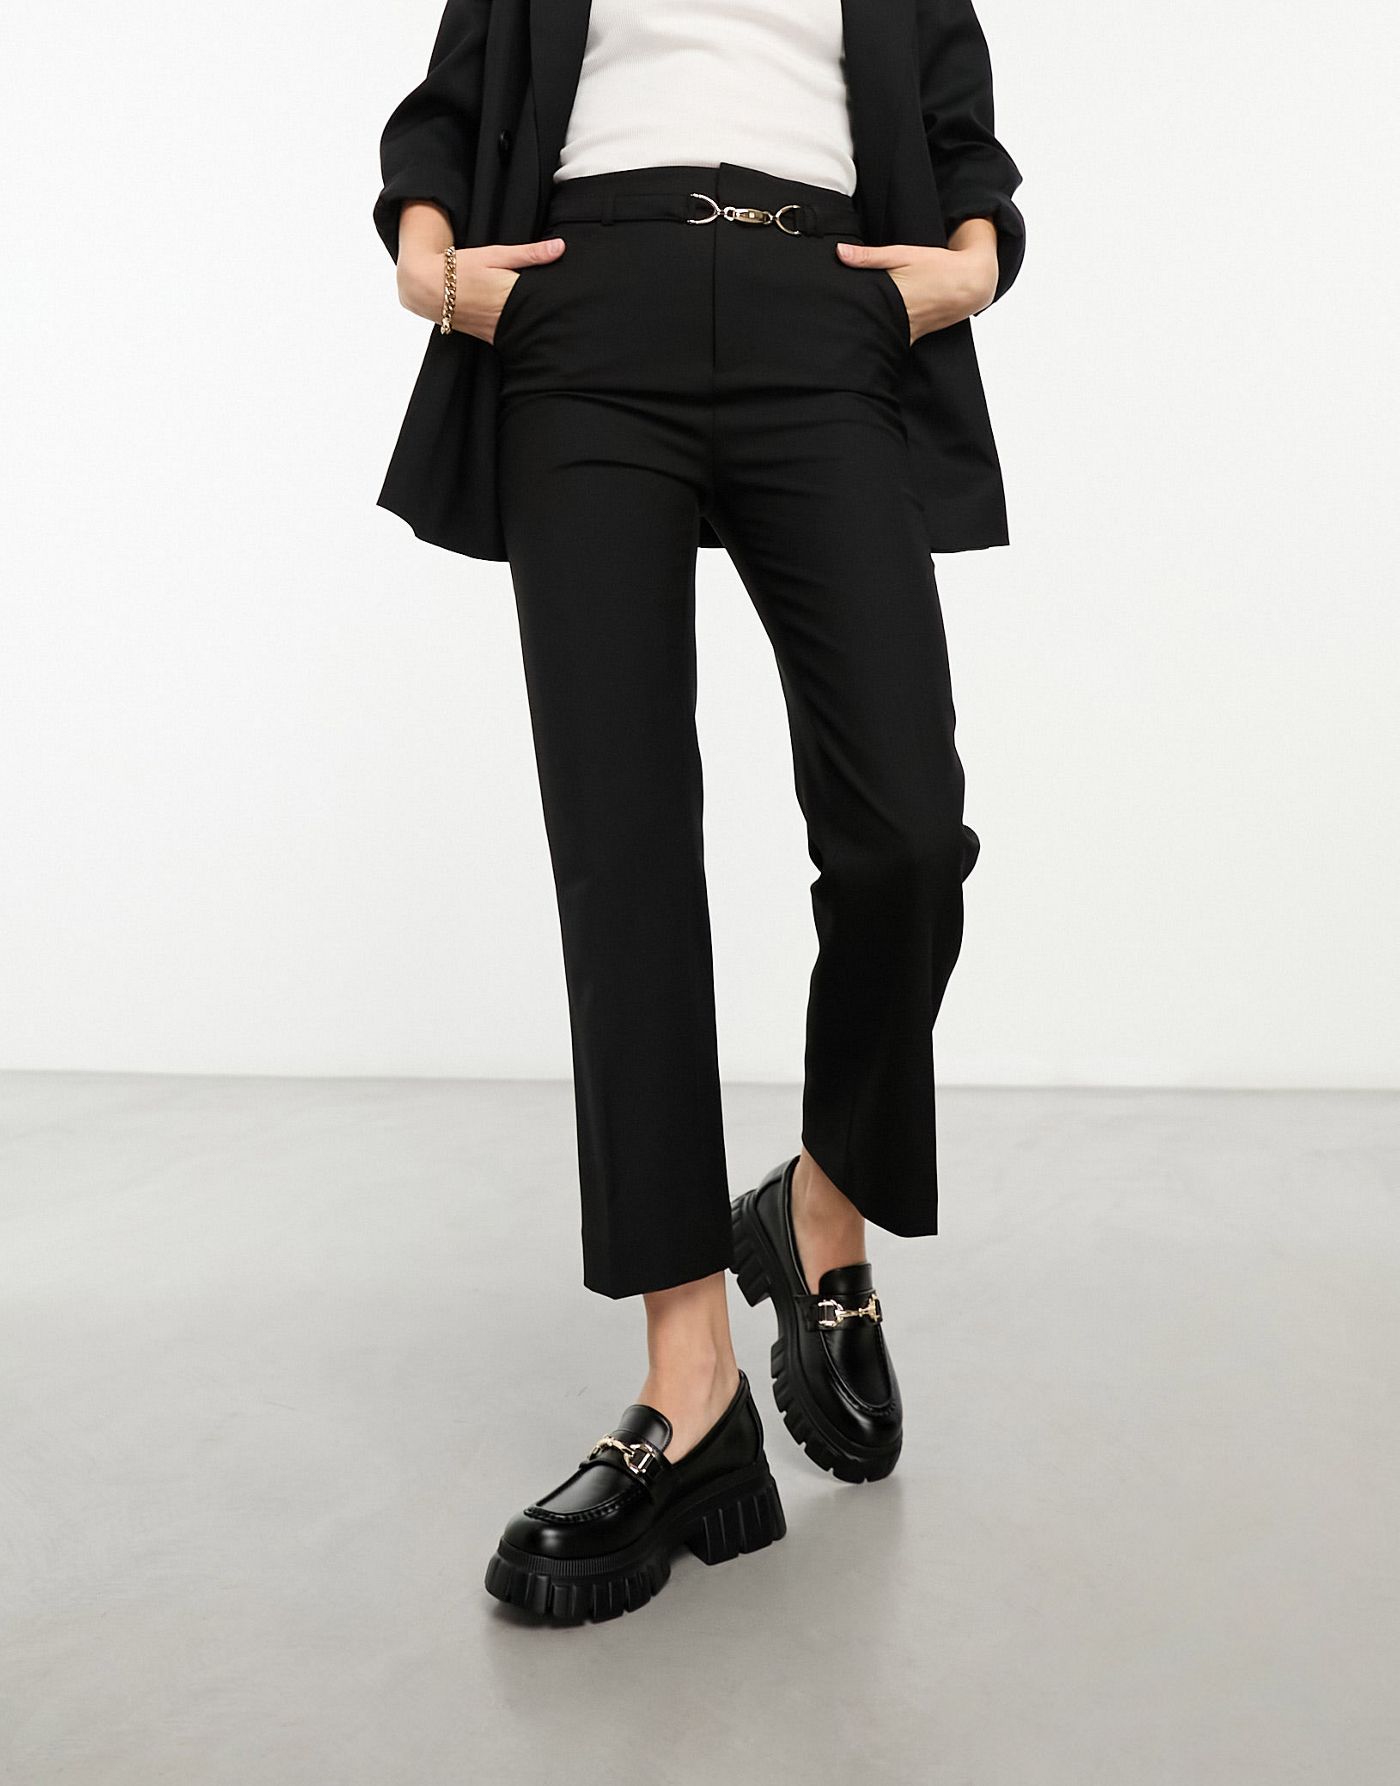 & Other Stories stretch wool blend trousers with self- belt detail  in black